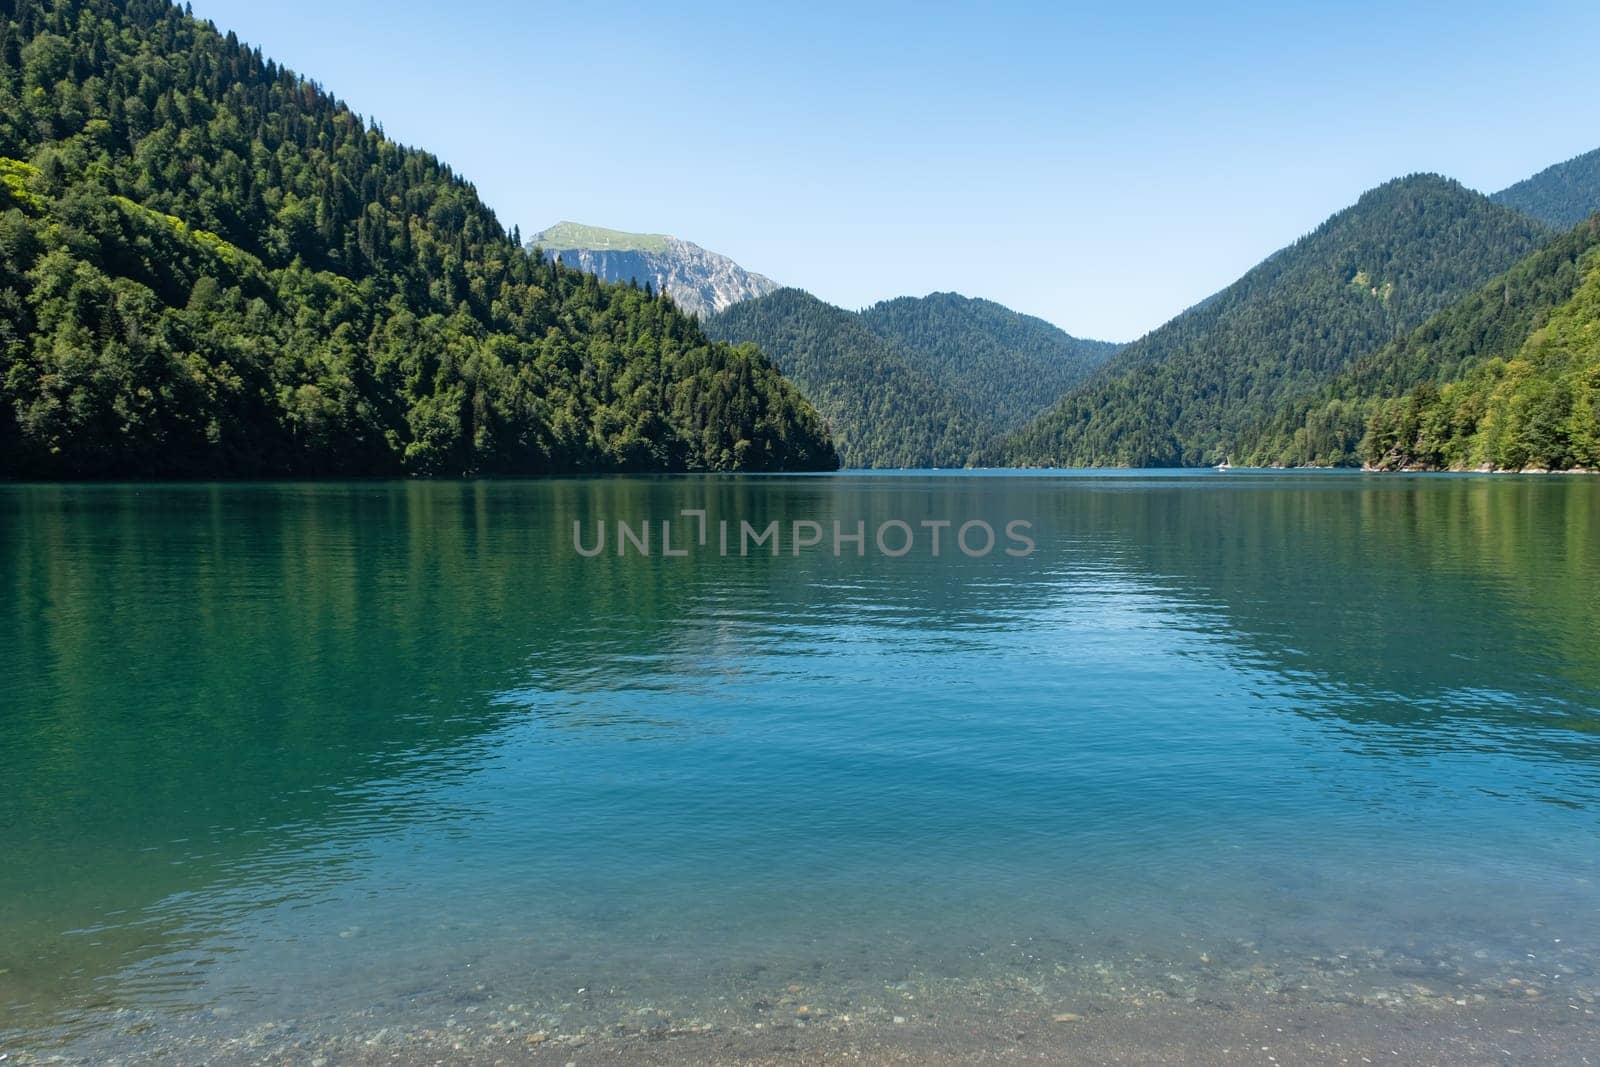 Beautiful mountain Lake Ritsa. Lake Ritsa in the Caucasus Mountains, in the north-western part of Abkhazia, Georgia, surrounded by mixed mountain forests and subalpine meadows by NataliPopova